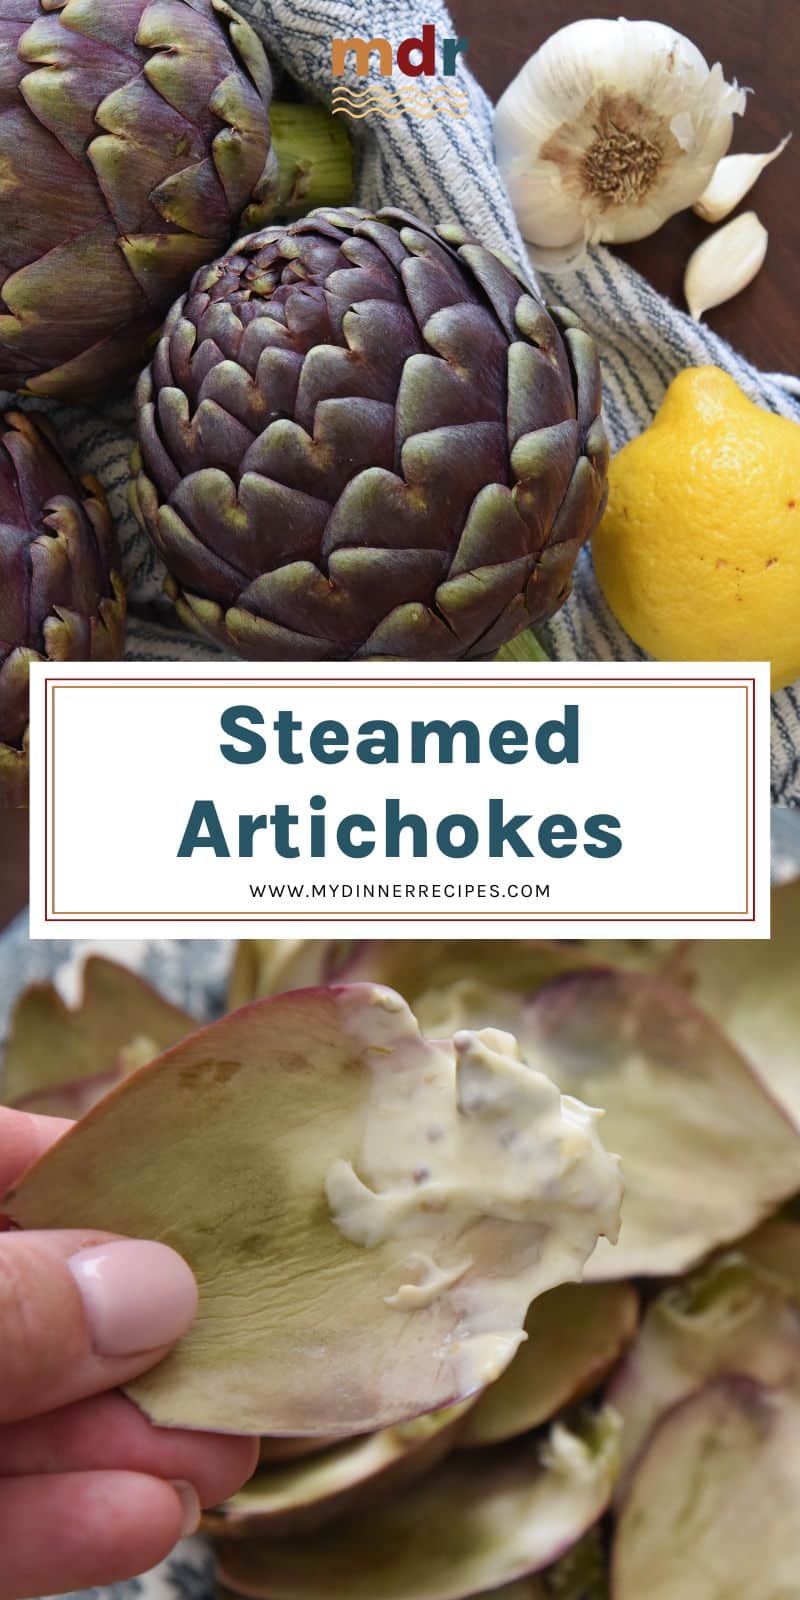 Whole artichokes, lemons, and garlic. Hand holding artichoke leaf that has been dipped in zesty caper dipping sauce. 